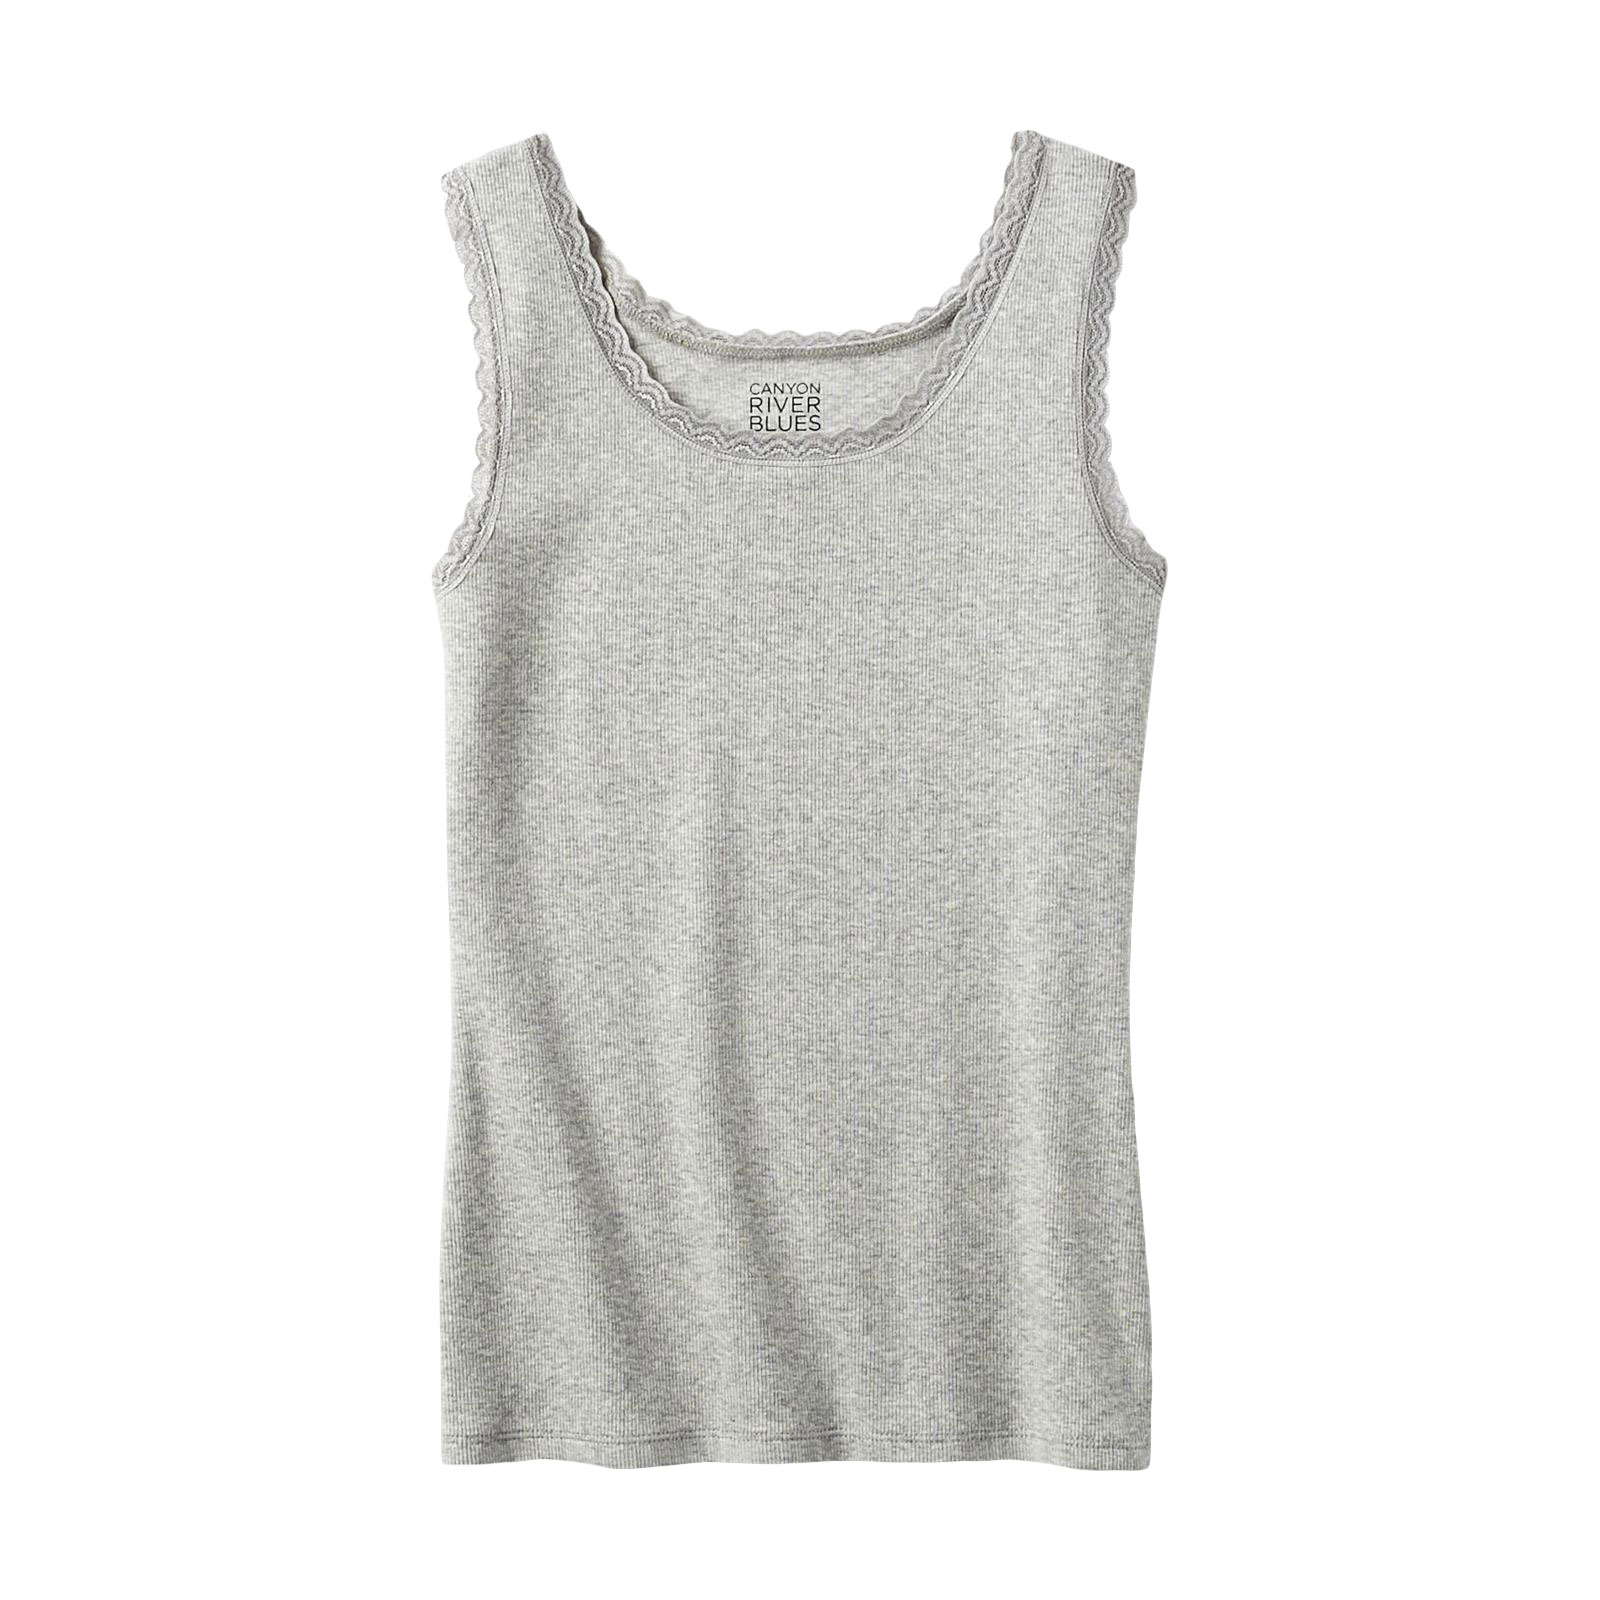 Canyon River Blues Girl's Lace-Trimmed Tank Top